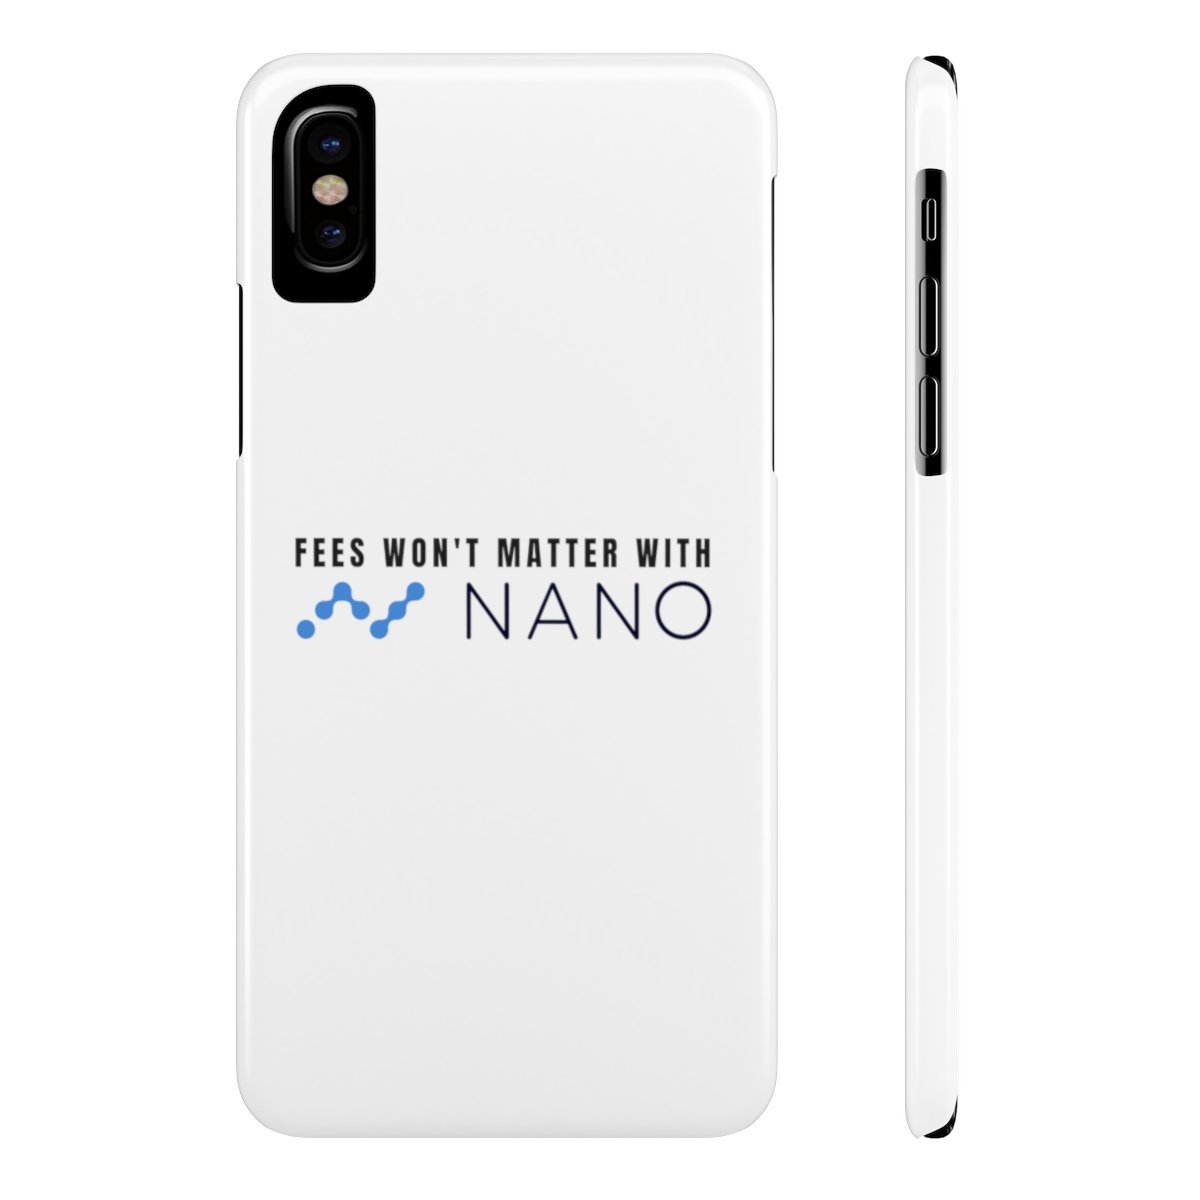 Fees won't matter with nano - Case Mate Slim Phone Cases TCP1607 iPhone X Slim Official Crypto  Merch